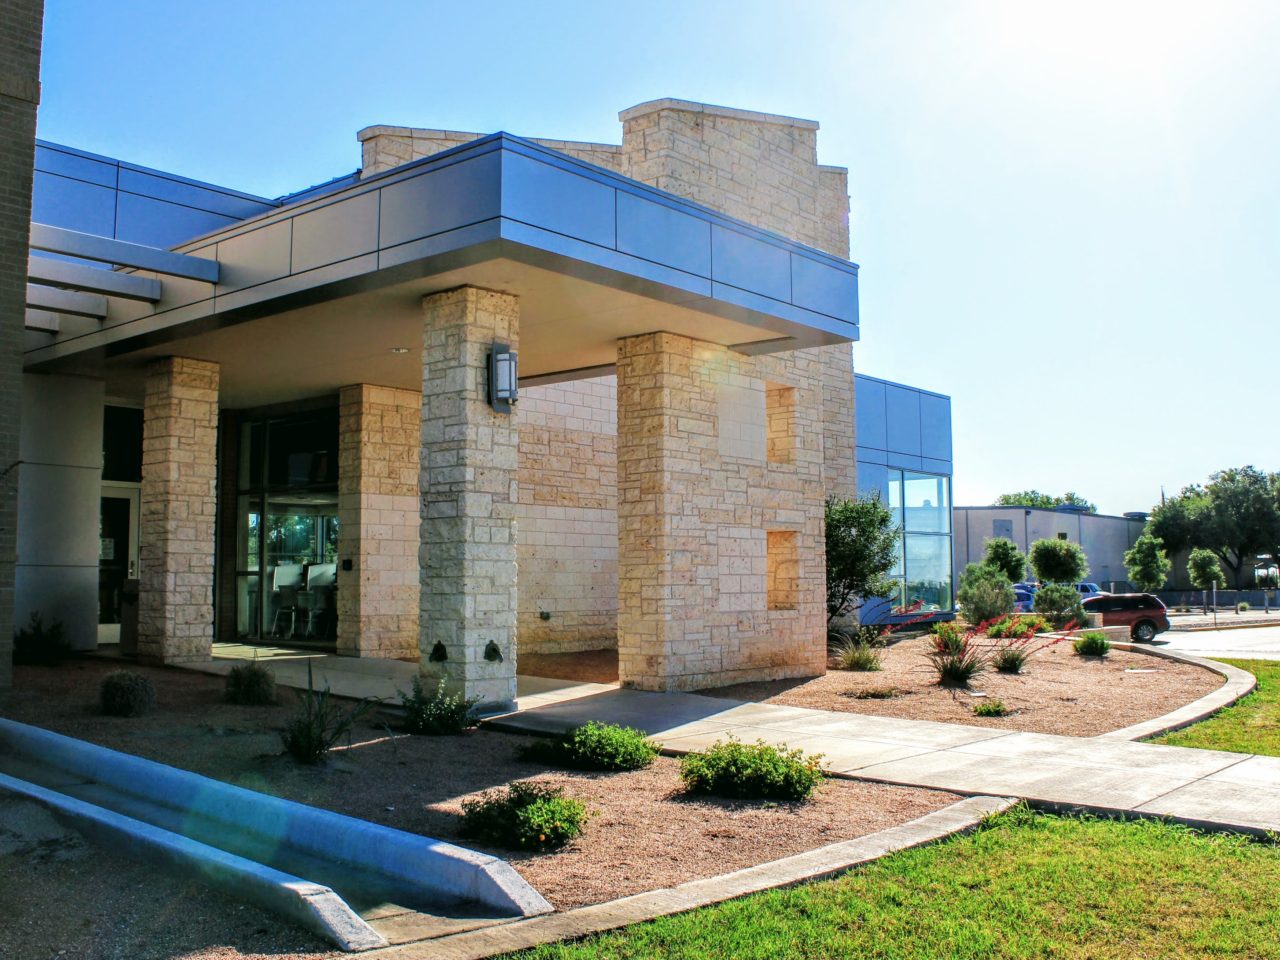 Student Services building entrance on San Angelo campus